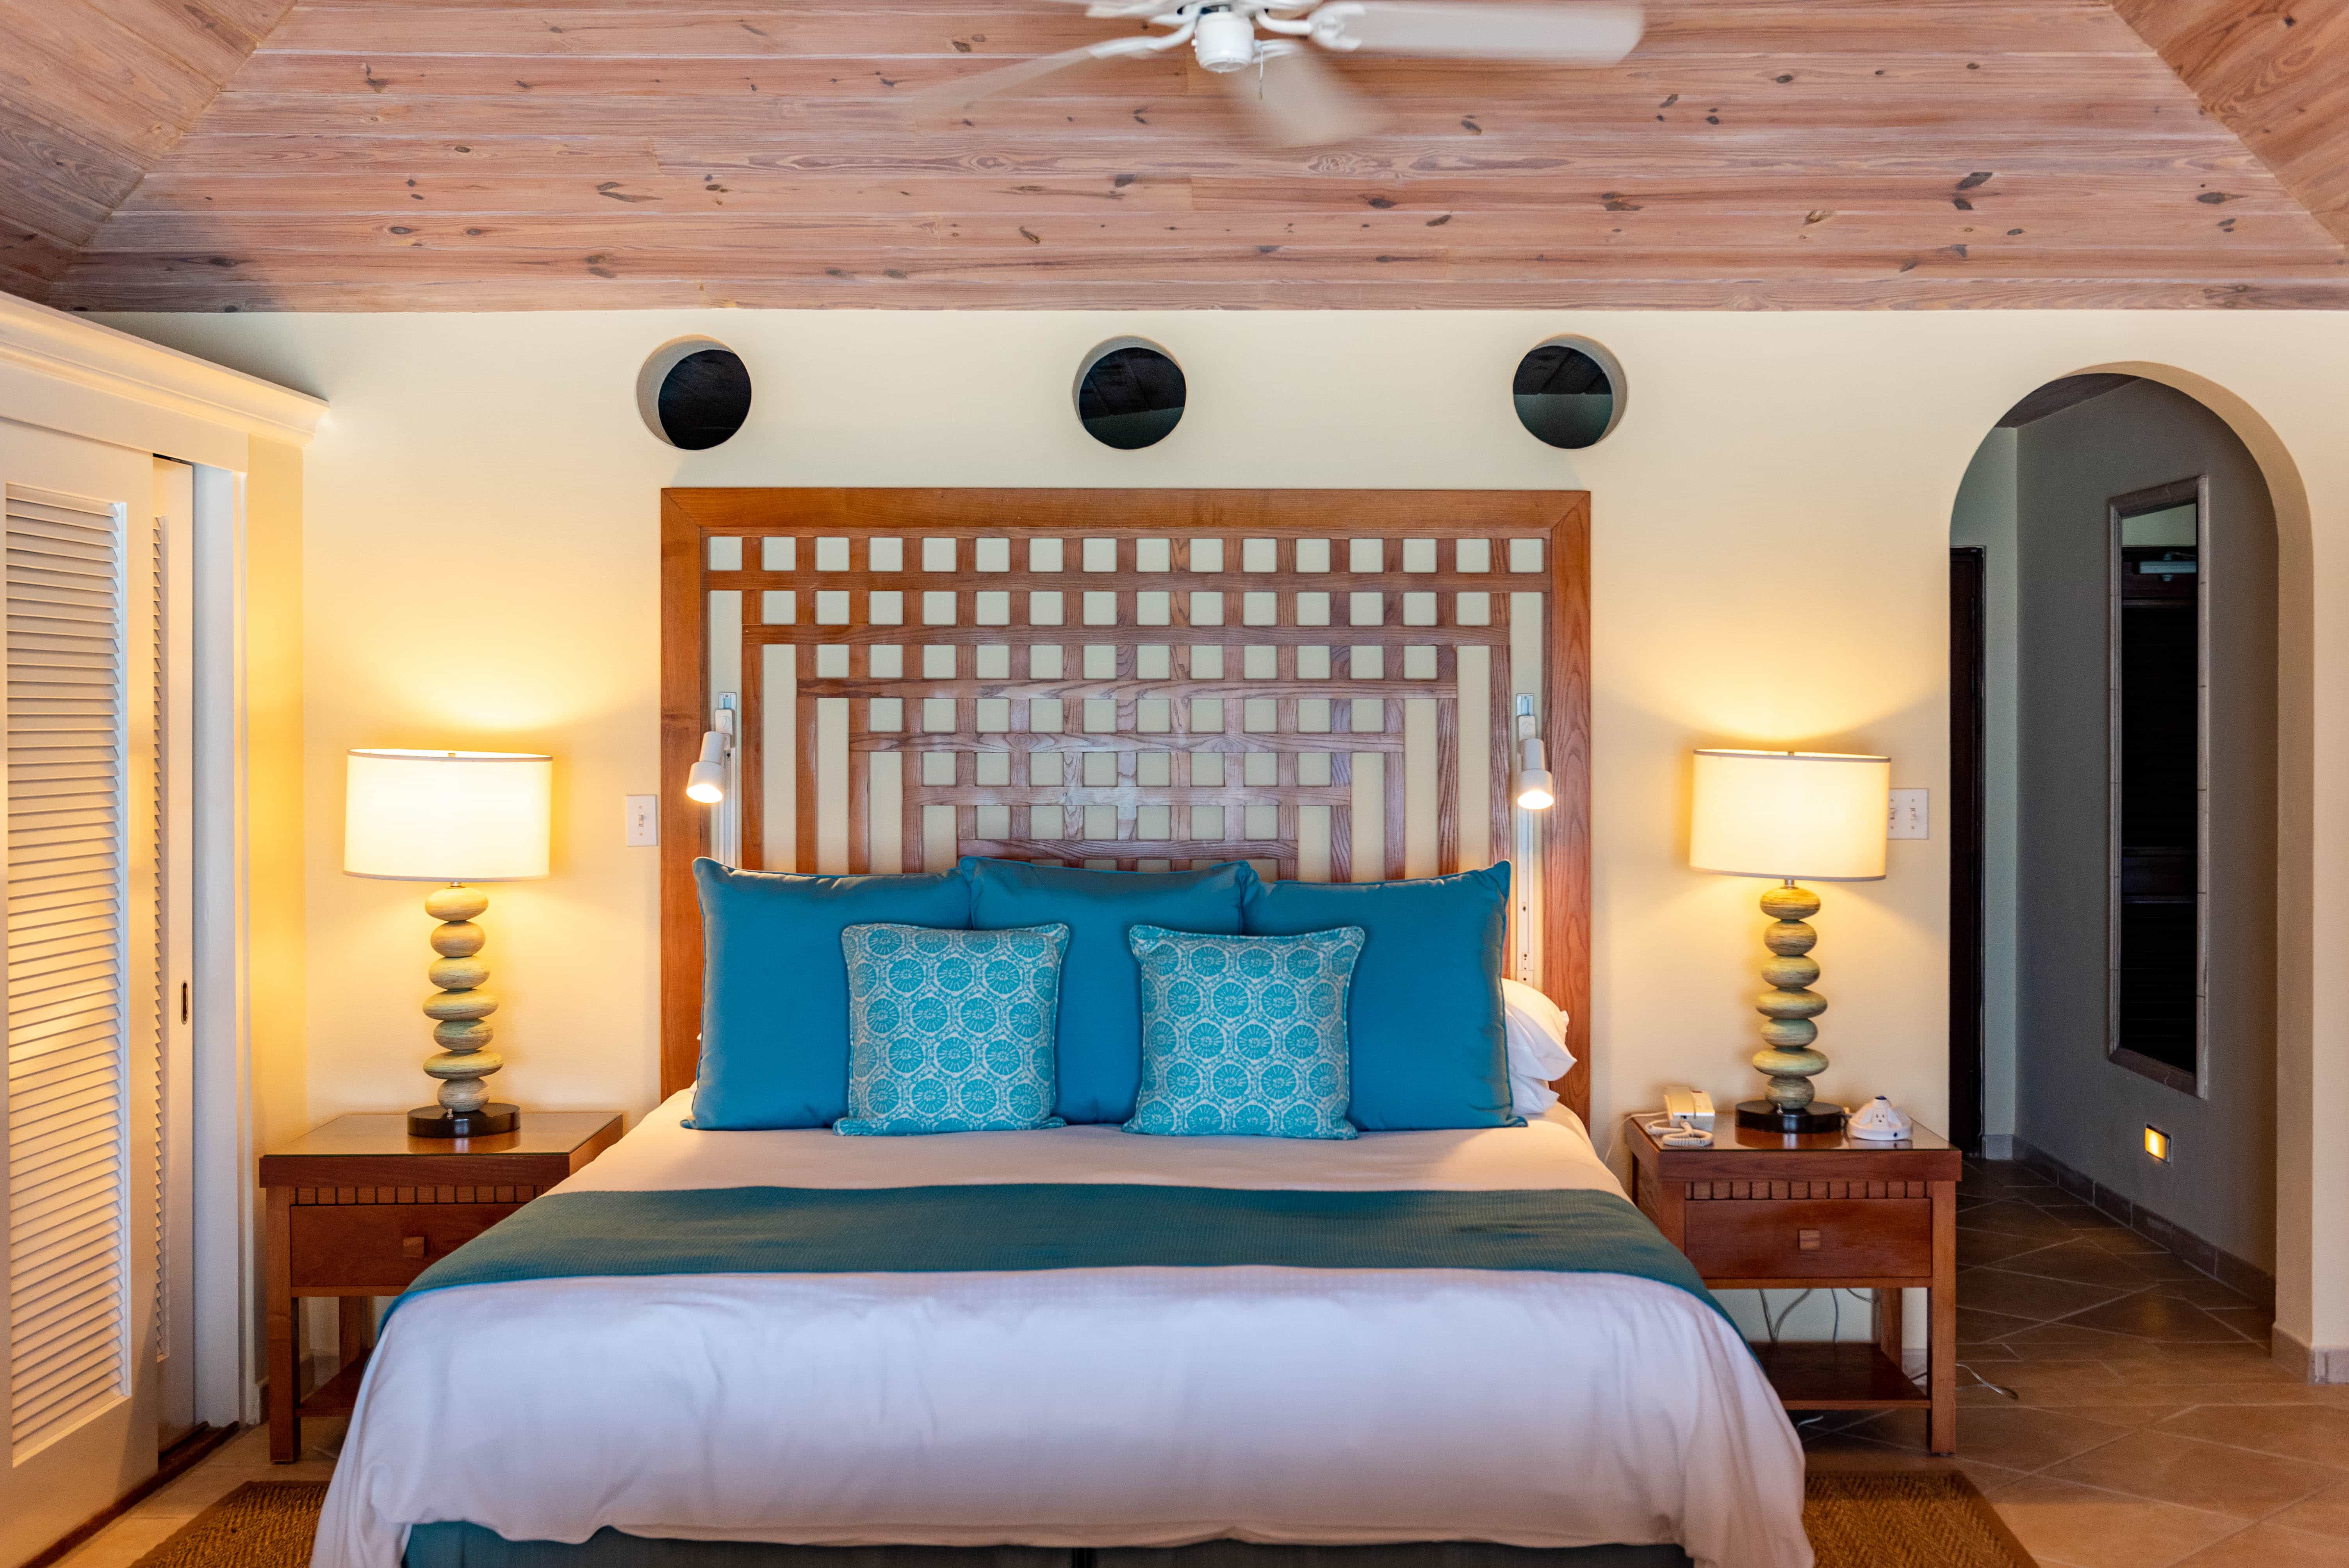 Almost all beautifully appointed rooms open right out onto white sand.